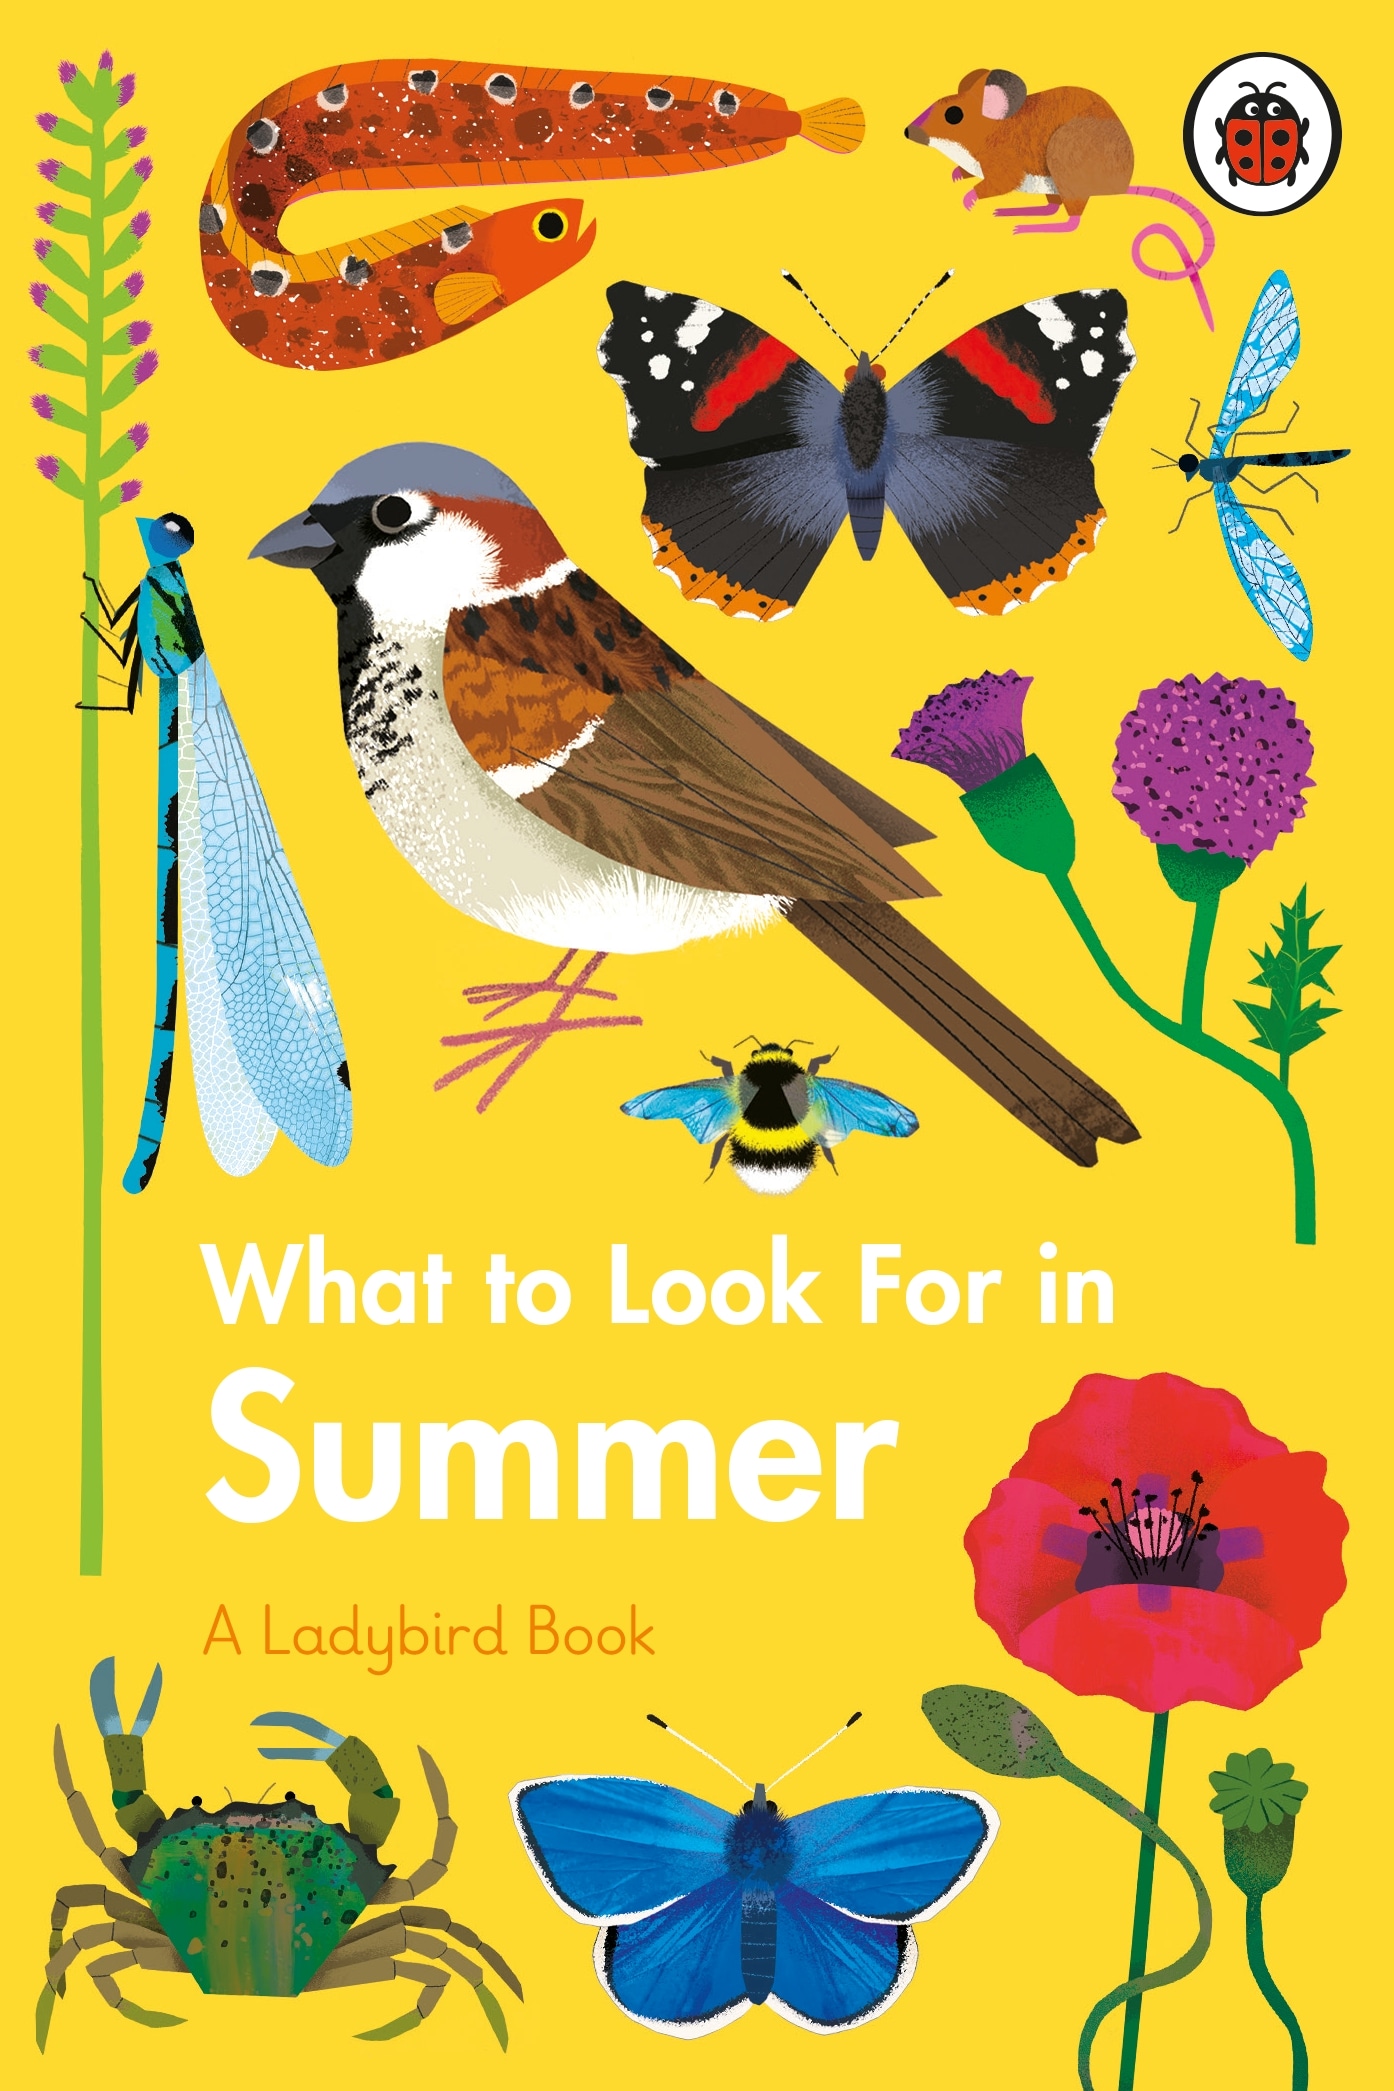 Book “What to Look For in Summer” by Elizabeth Jenner, Natasha Durley — January 21, 2021